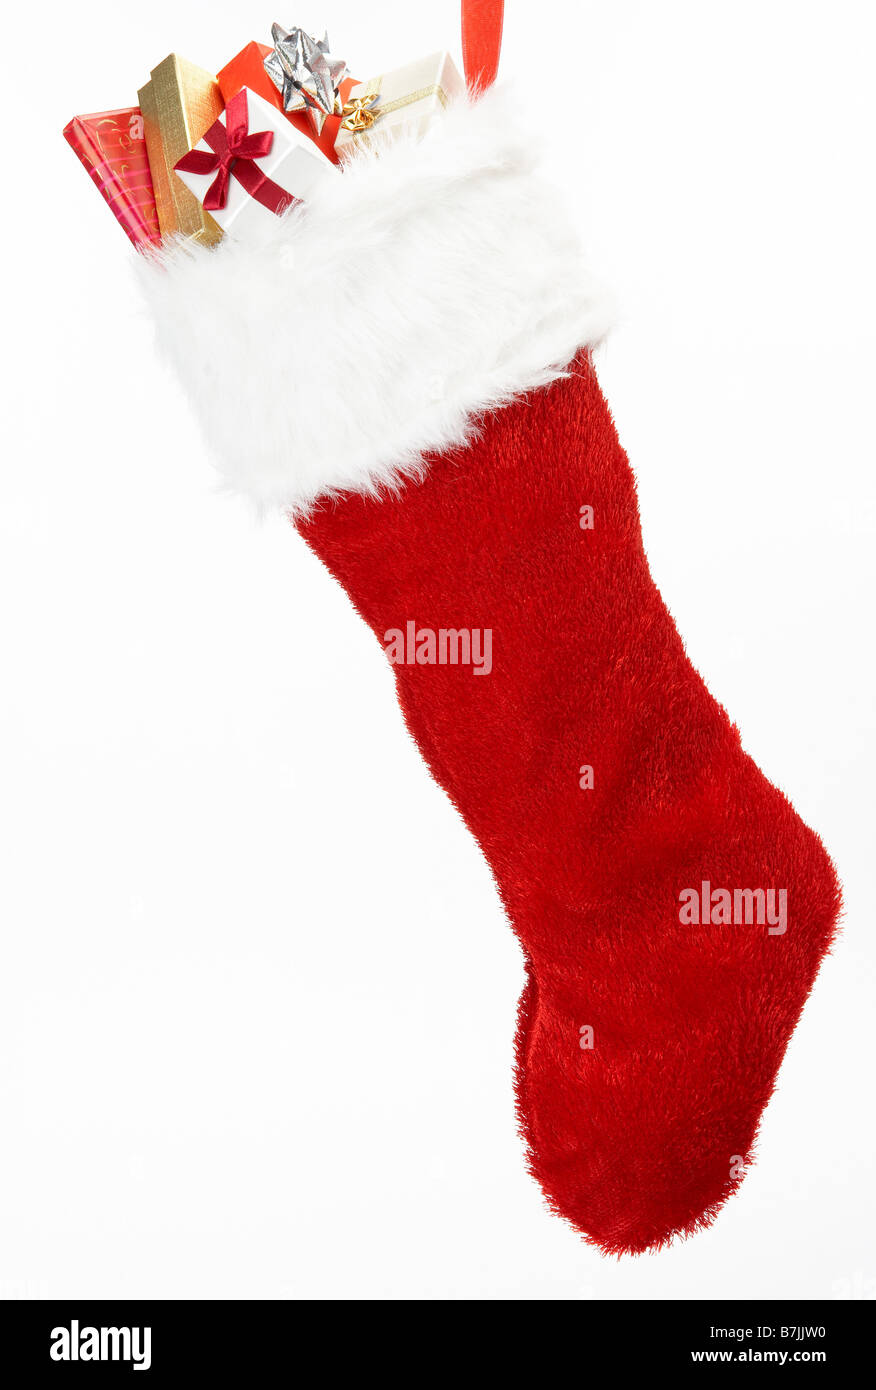 Christmas Stocking With Gifts Against White Background Stock Photo